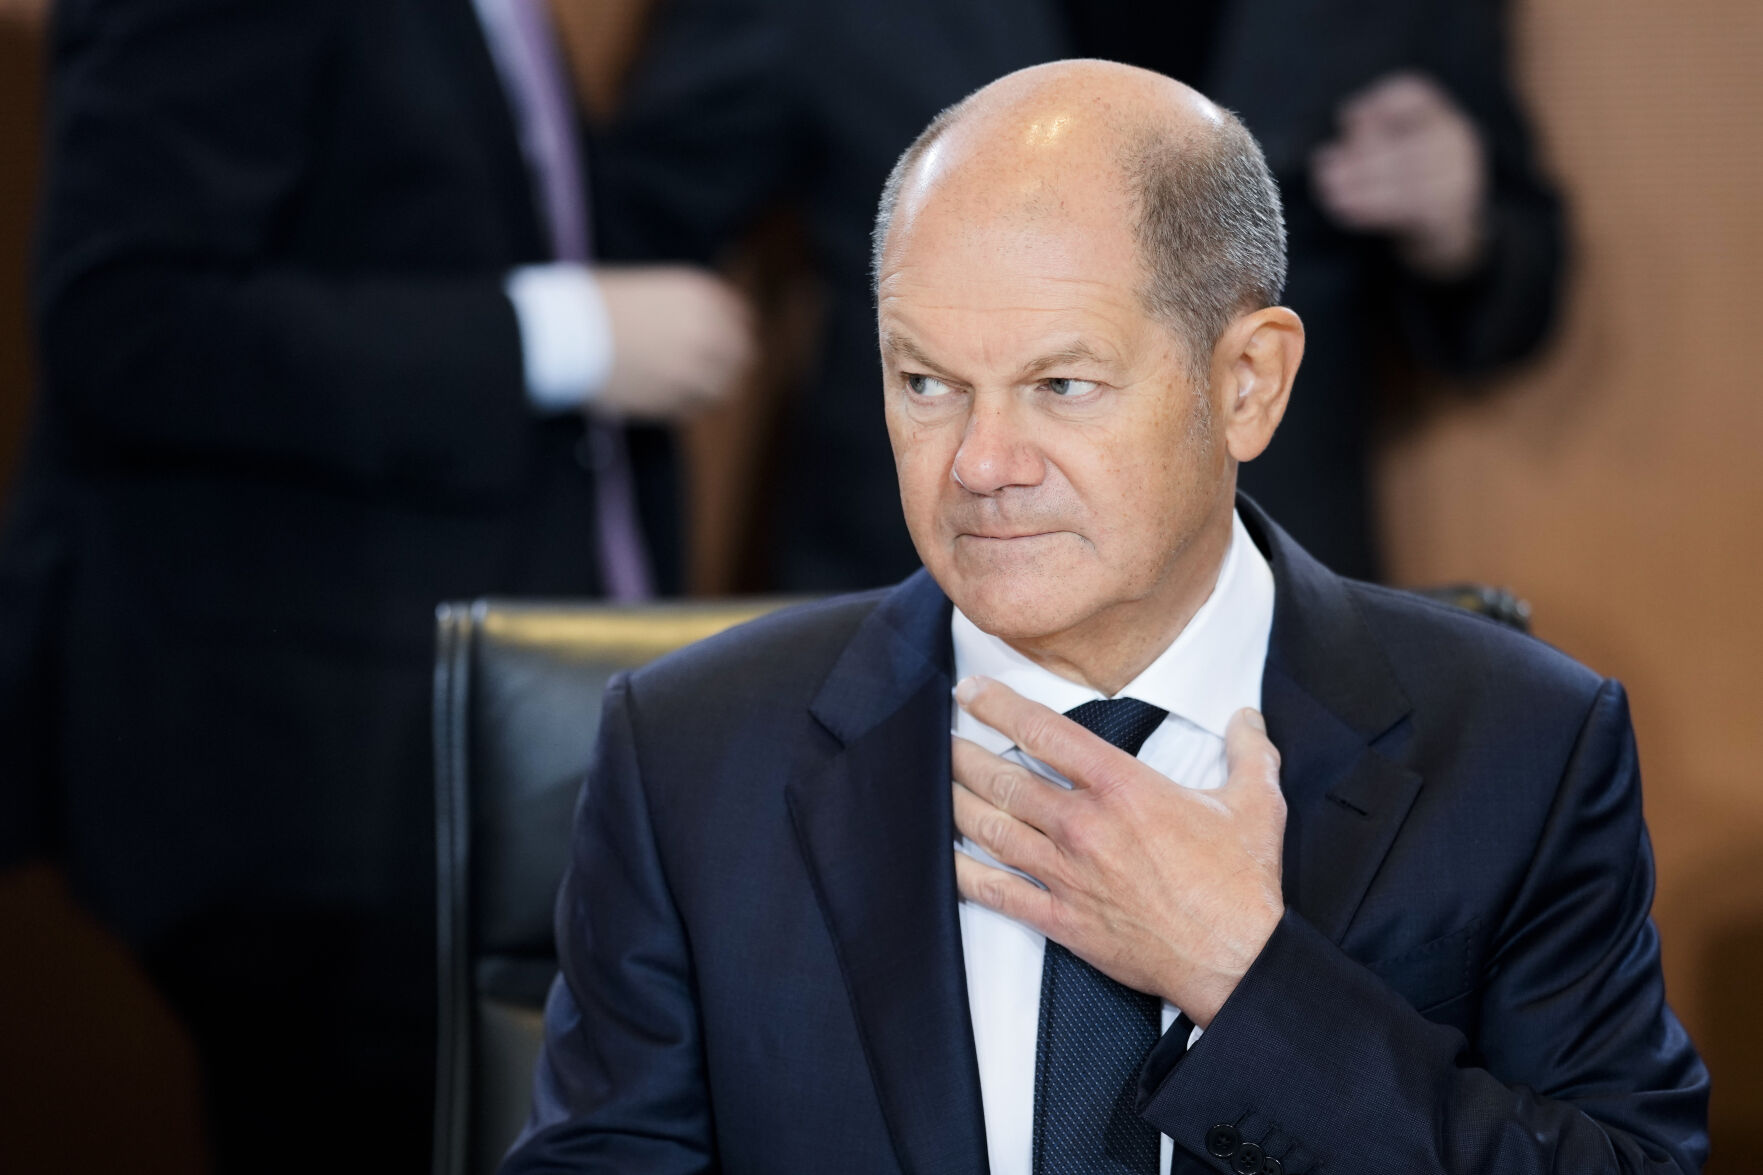 <p>German Chancellor Olaf Scholz attends the weekly cabinet meeting of the German government at the chancellery in Berlin, Germany, Wednesday, Jan. 25, 2023. (AP Photo/Markus Schreiber)</p>   PHOTO CREDIT: Markus Schreiber - staff, AP